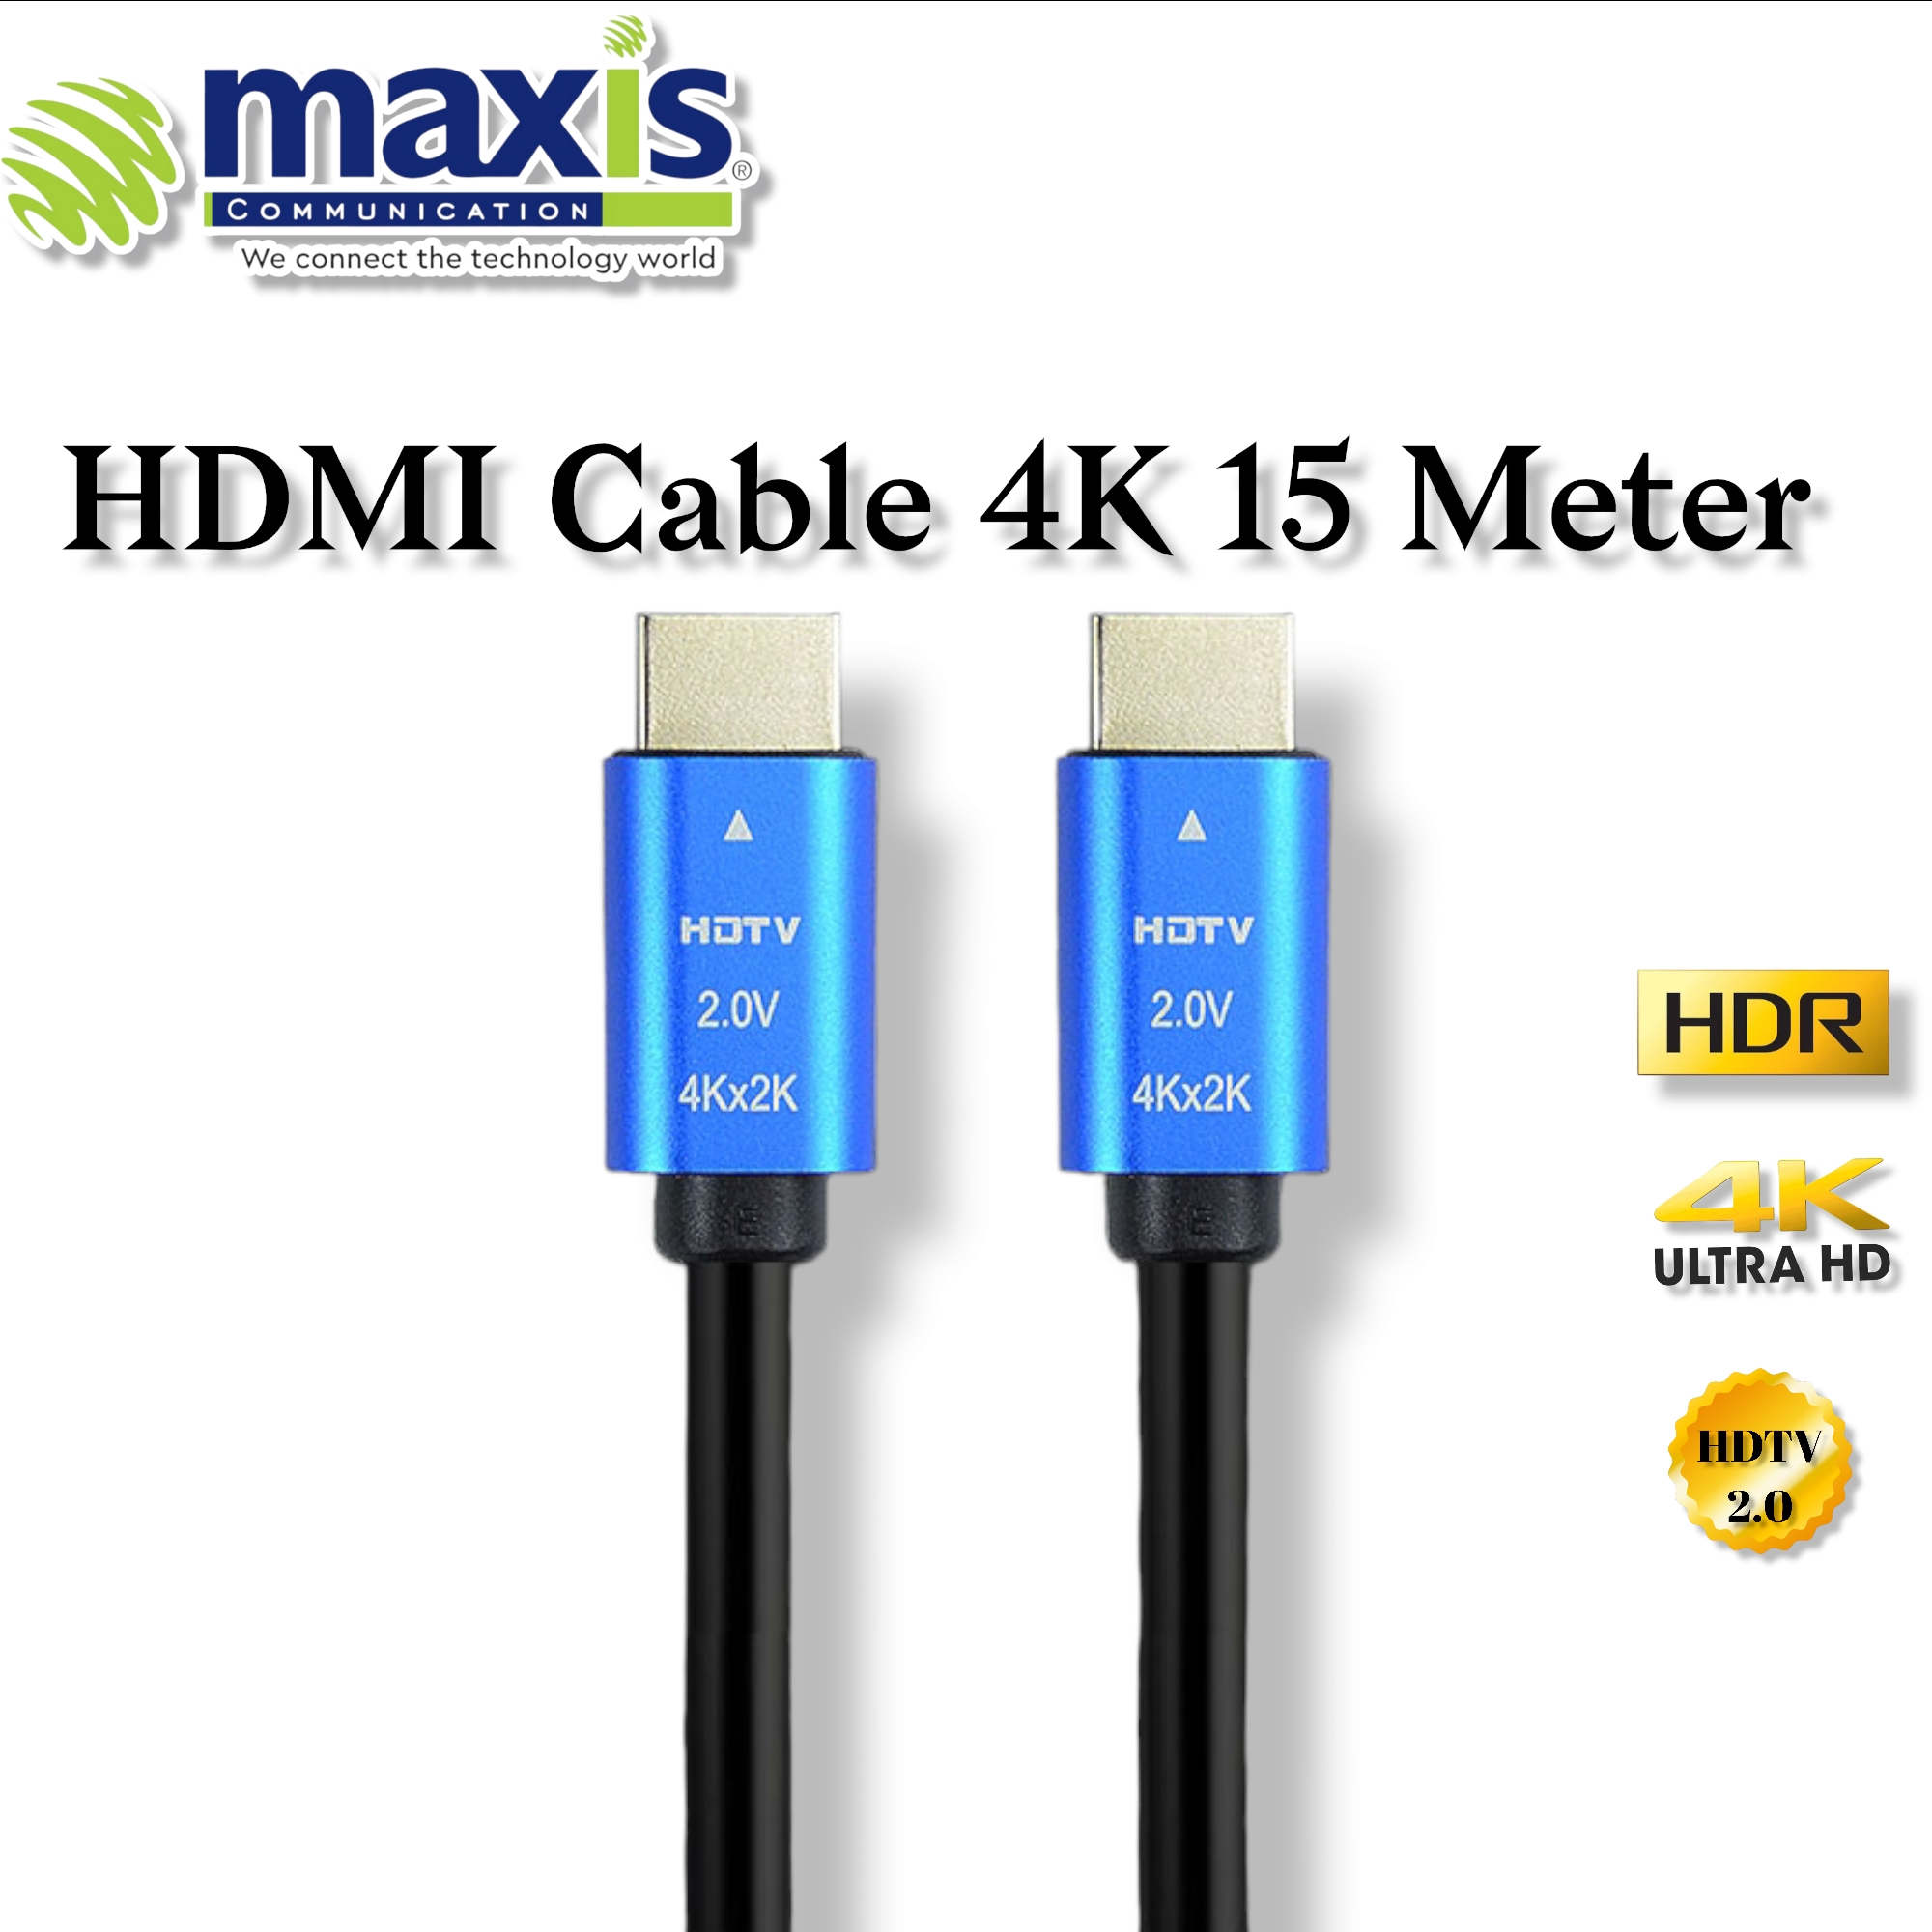 product.php?id=FISCO 2.0v HDM Premium Cable Ultra Hd 4k 15m